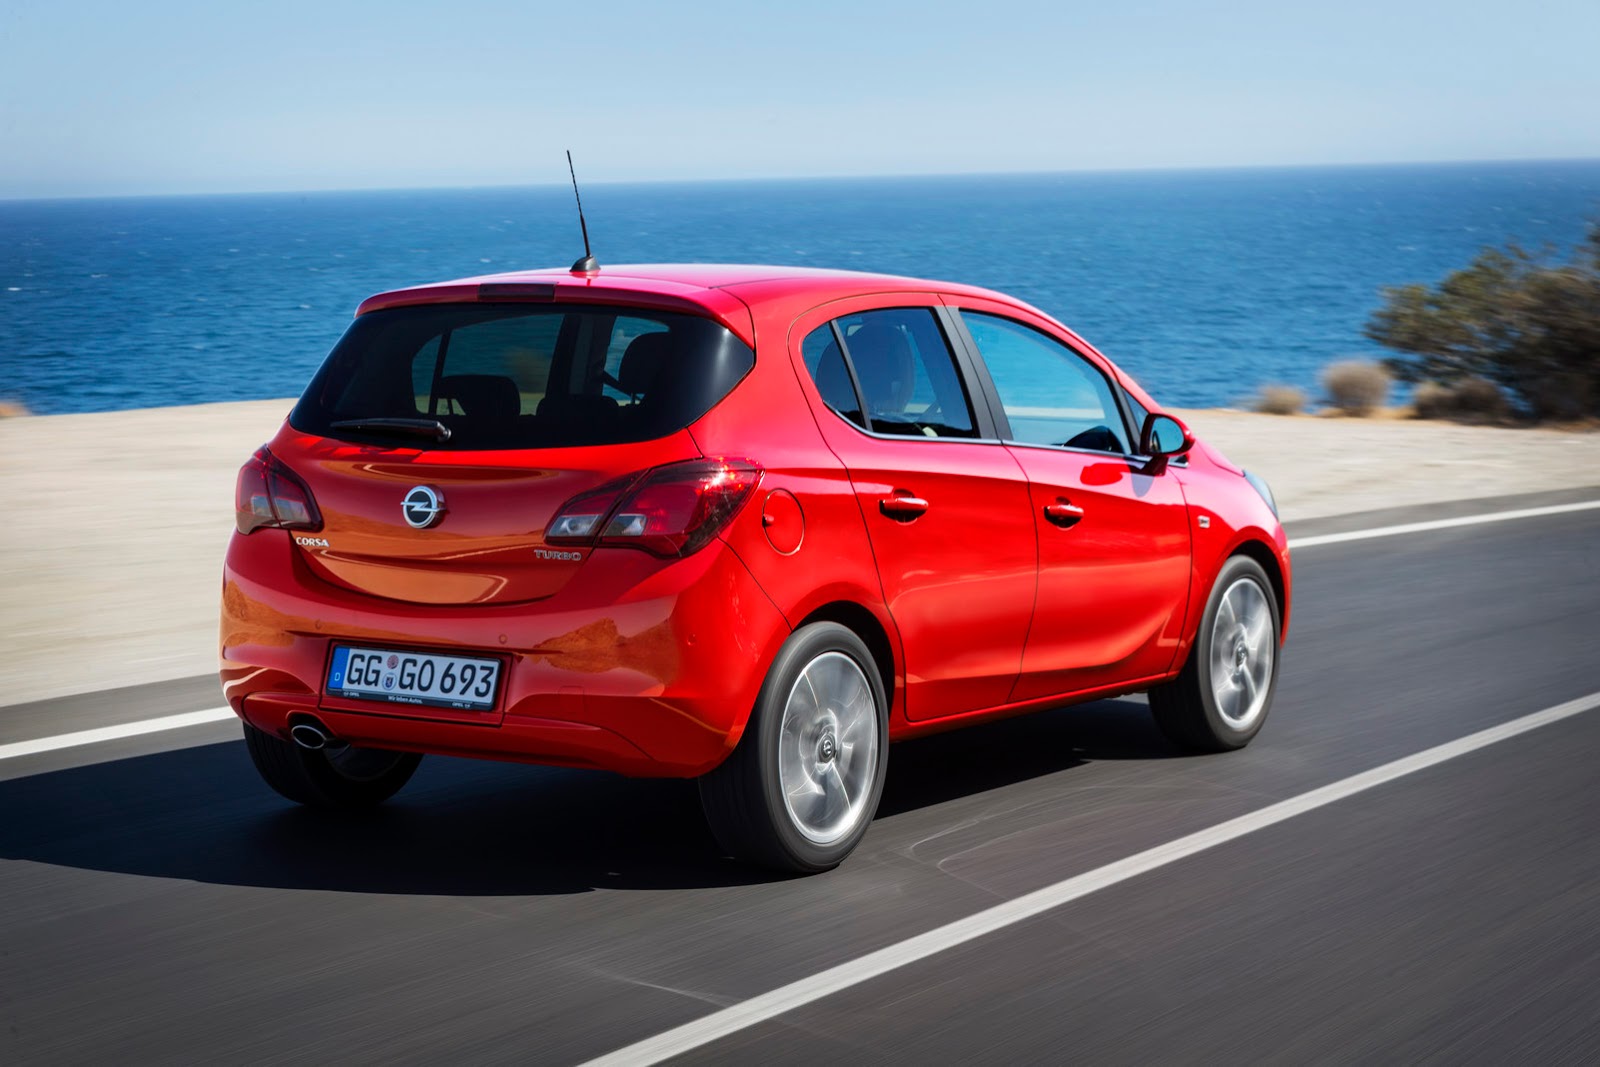 new-opel-vauxhall-corsa-revealed-with-adam-inspired-design-photo-gallery_24